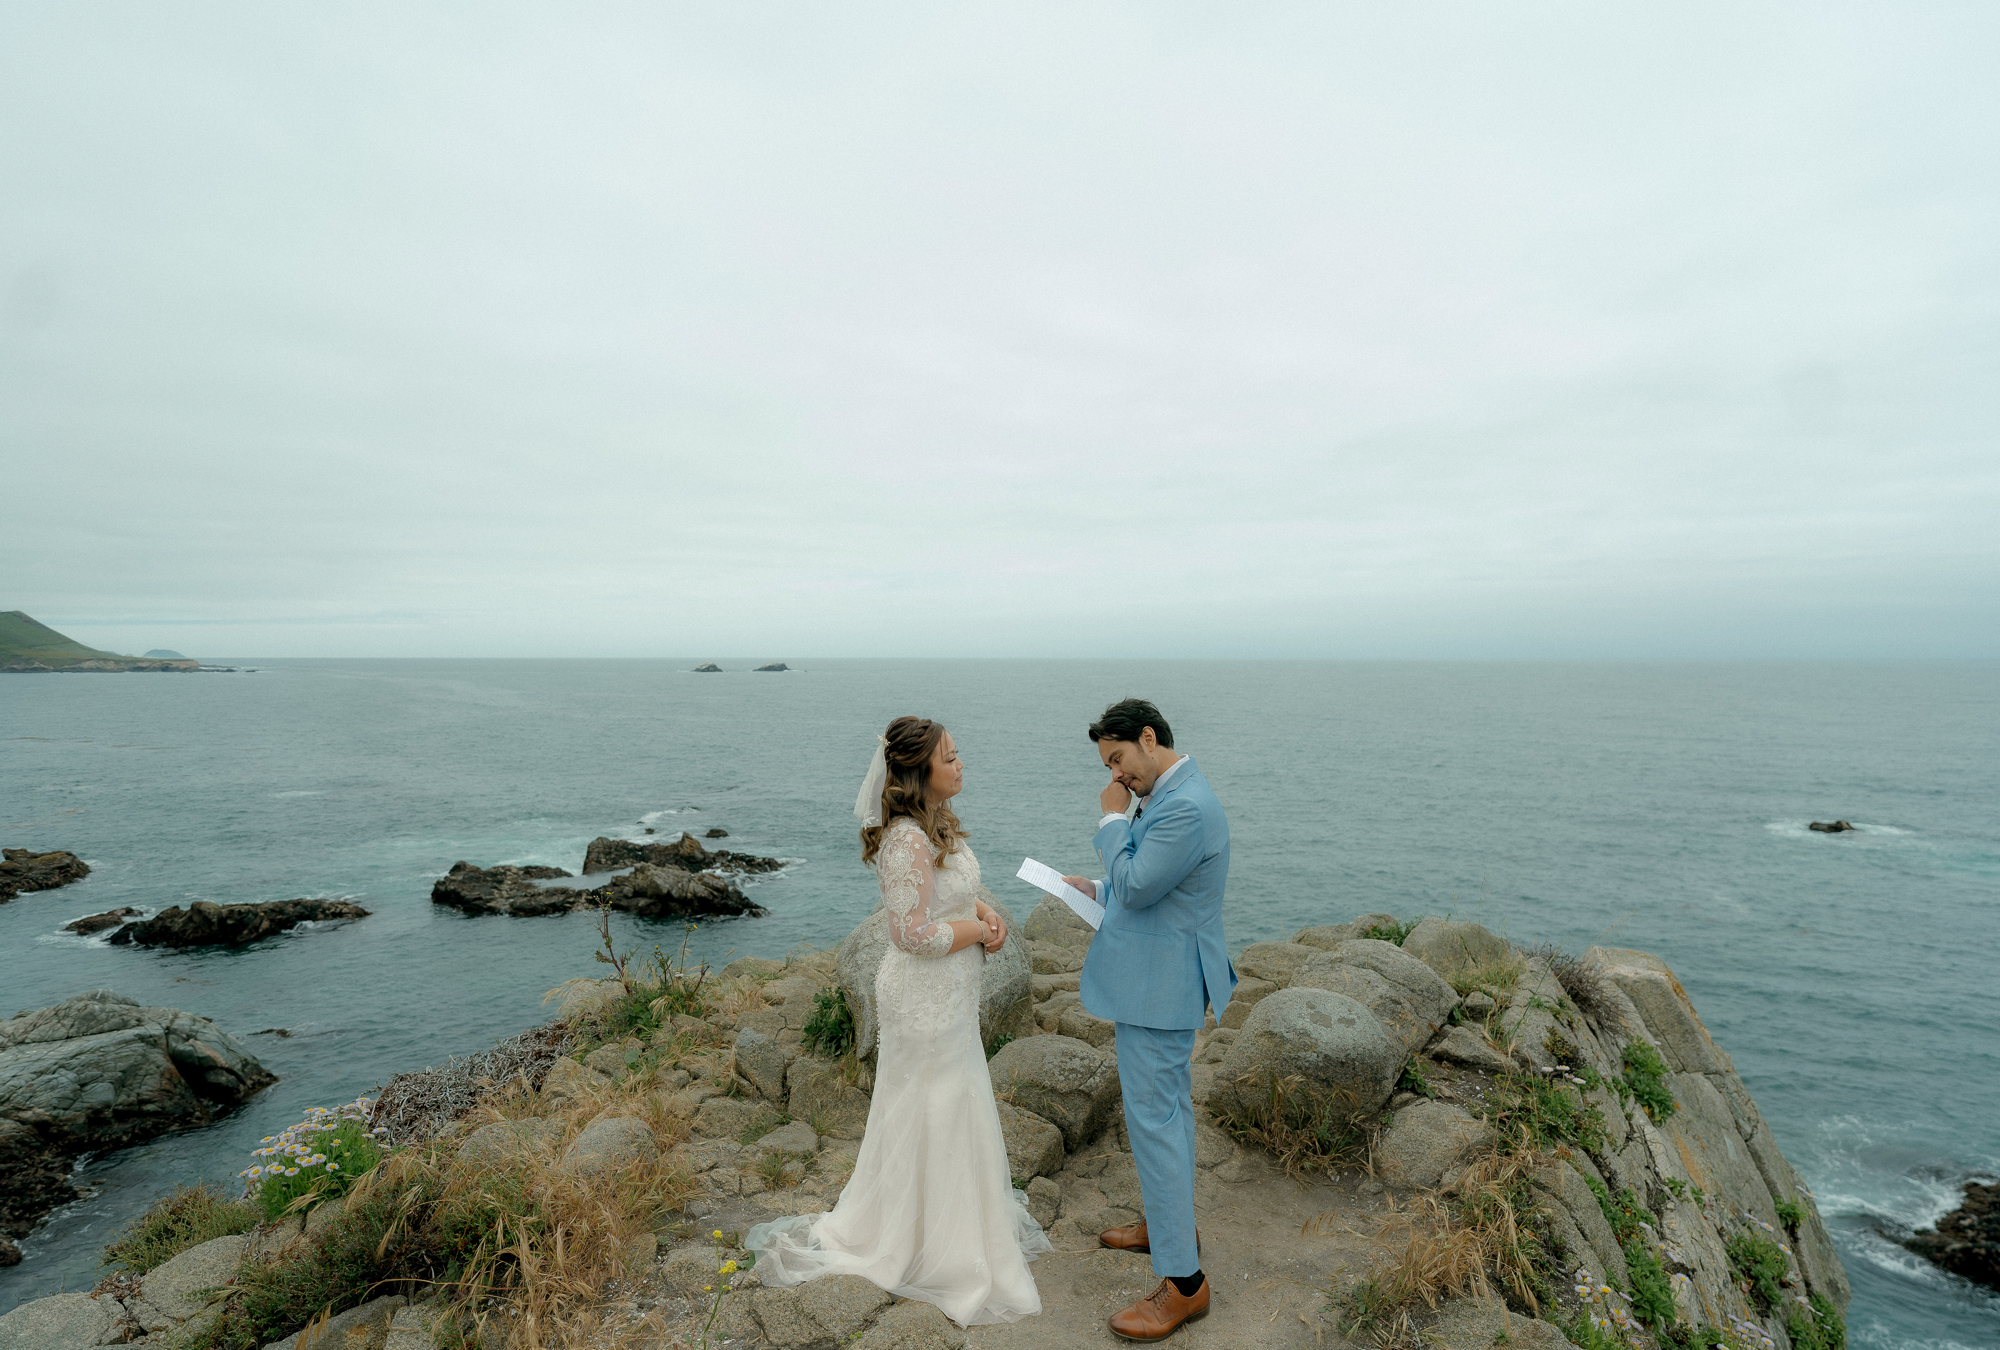 Kris and Tracey's private vows at the cliff's edge, gazing out at the beauty of Monterey Bay.